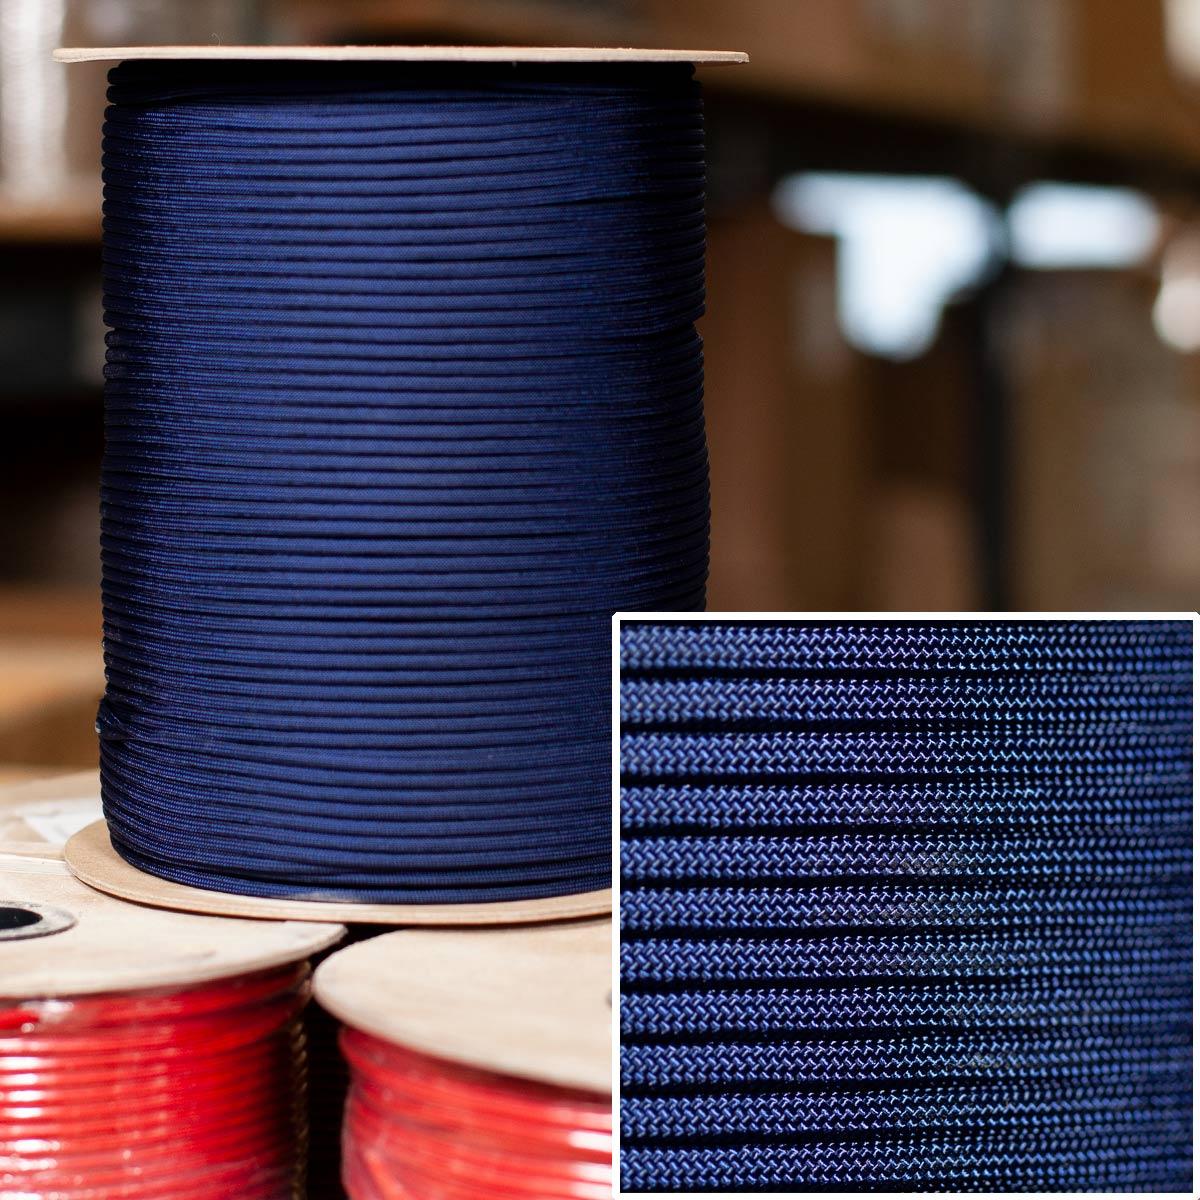 550 Paracord in Midnight Blue - 1000' Spool